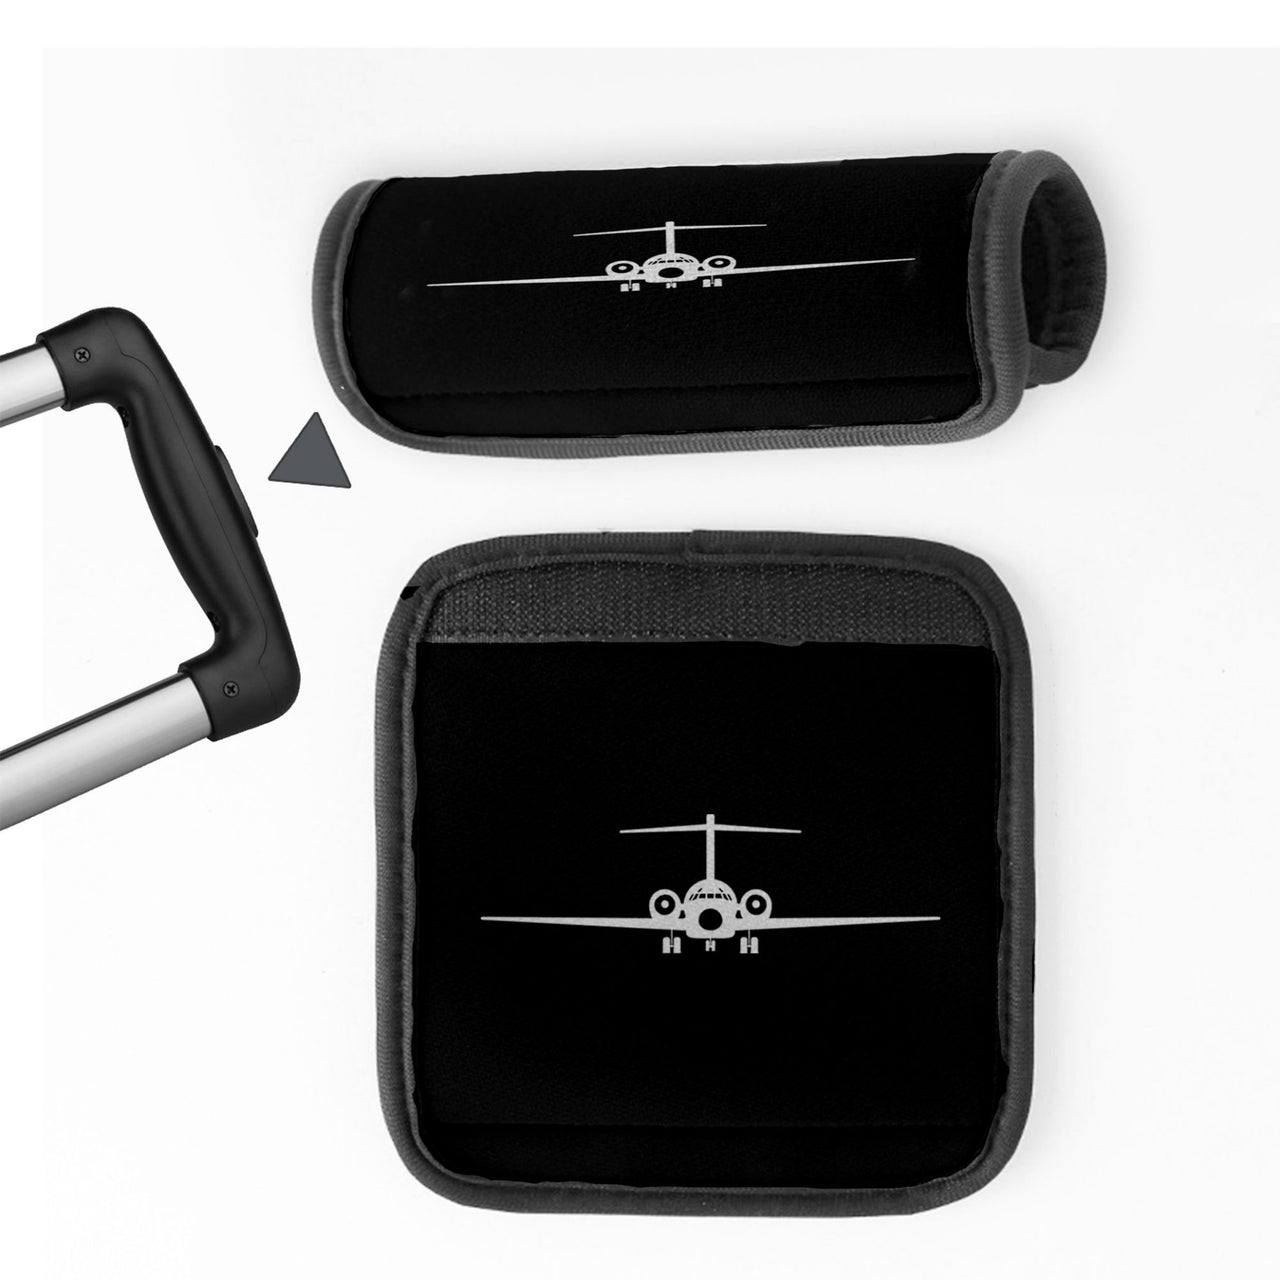 Boeing 717 Silhouette Designed Neoprene Luggage Handle Covers